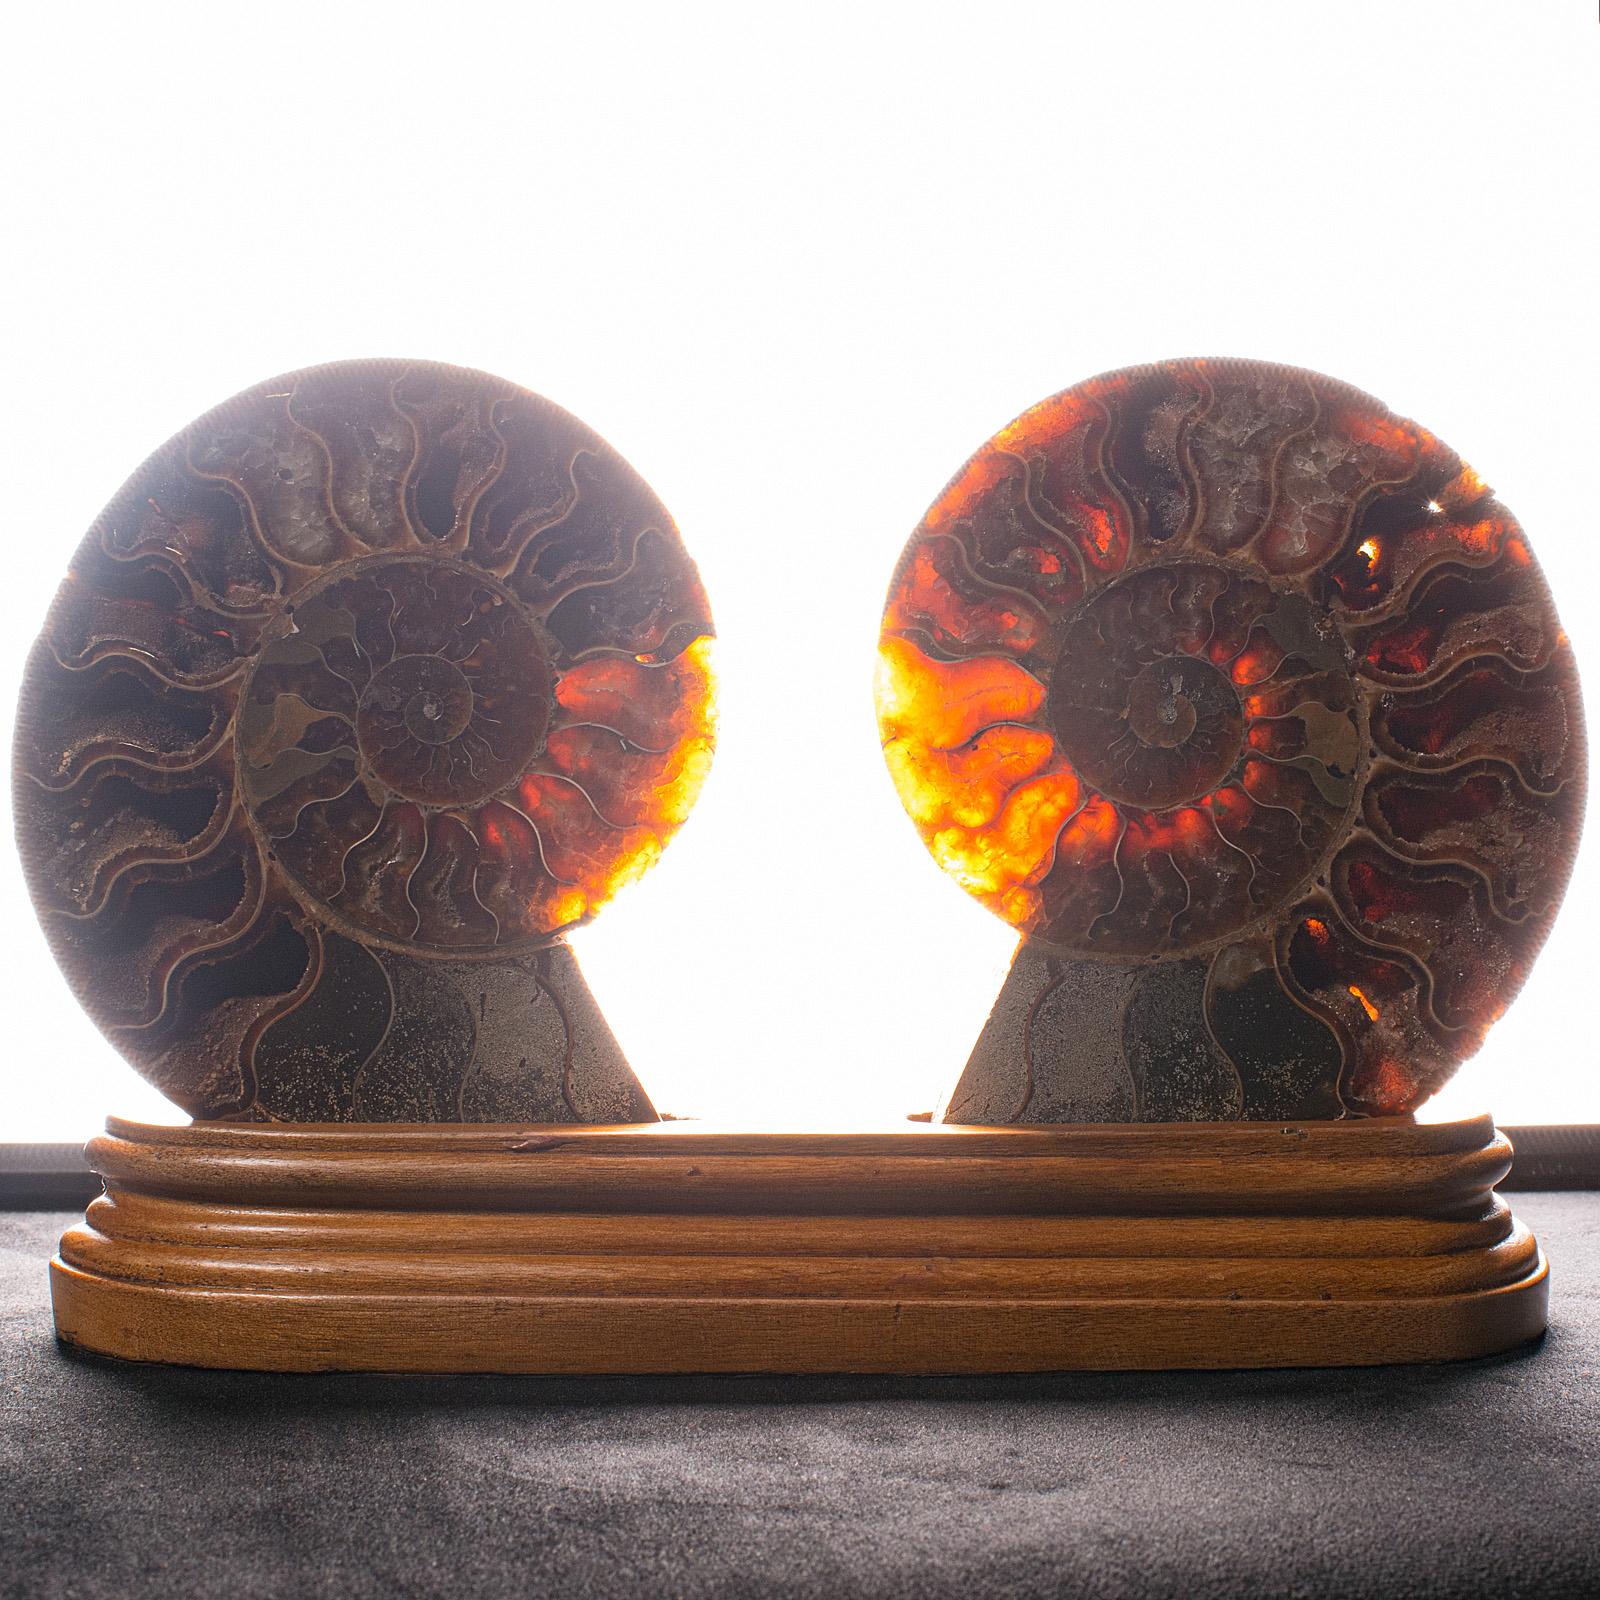 Vintage Decorative Halved Ammonite, African, Fossil, Display Plinth, Cretaceous For Sale 4